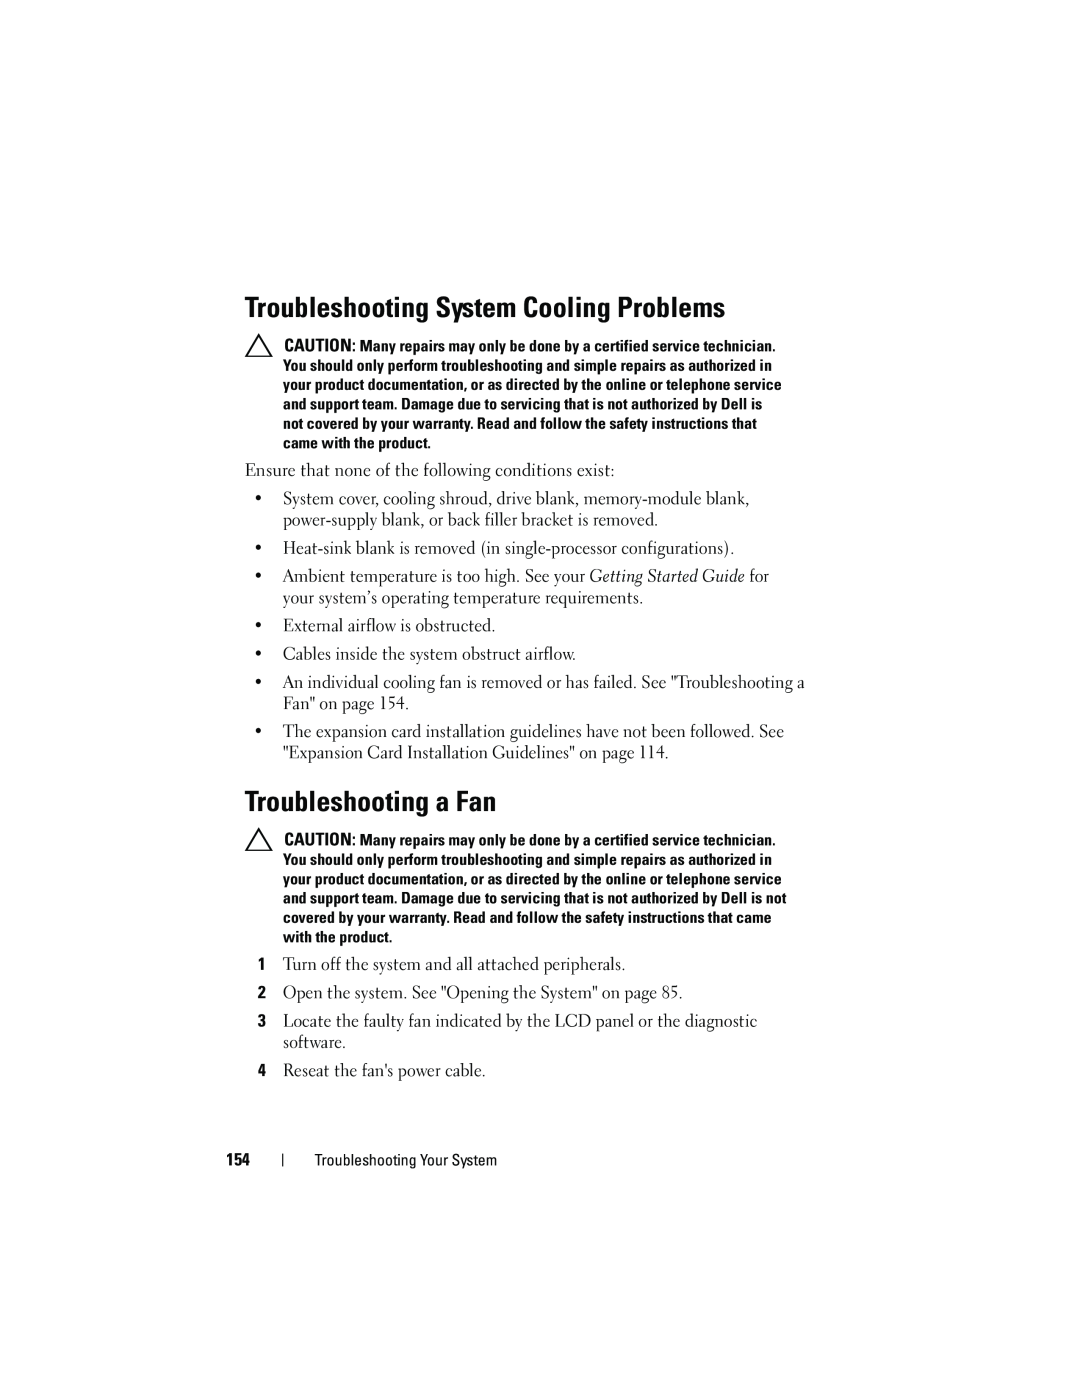 Dell T310 owner manual Troubleshooting System Cooling Problems, Troubleshooting a Fan 